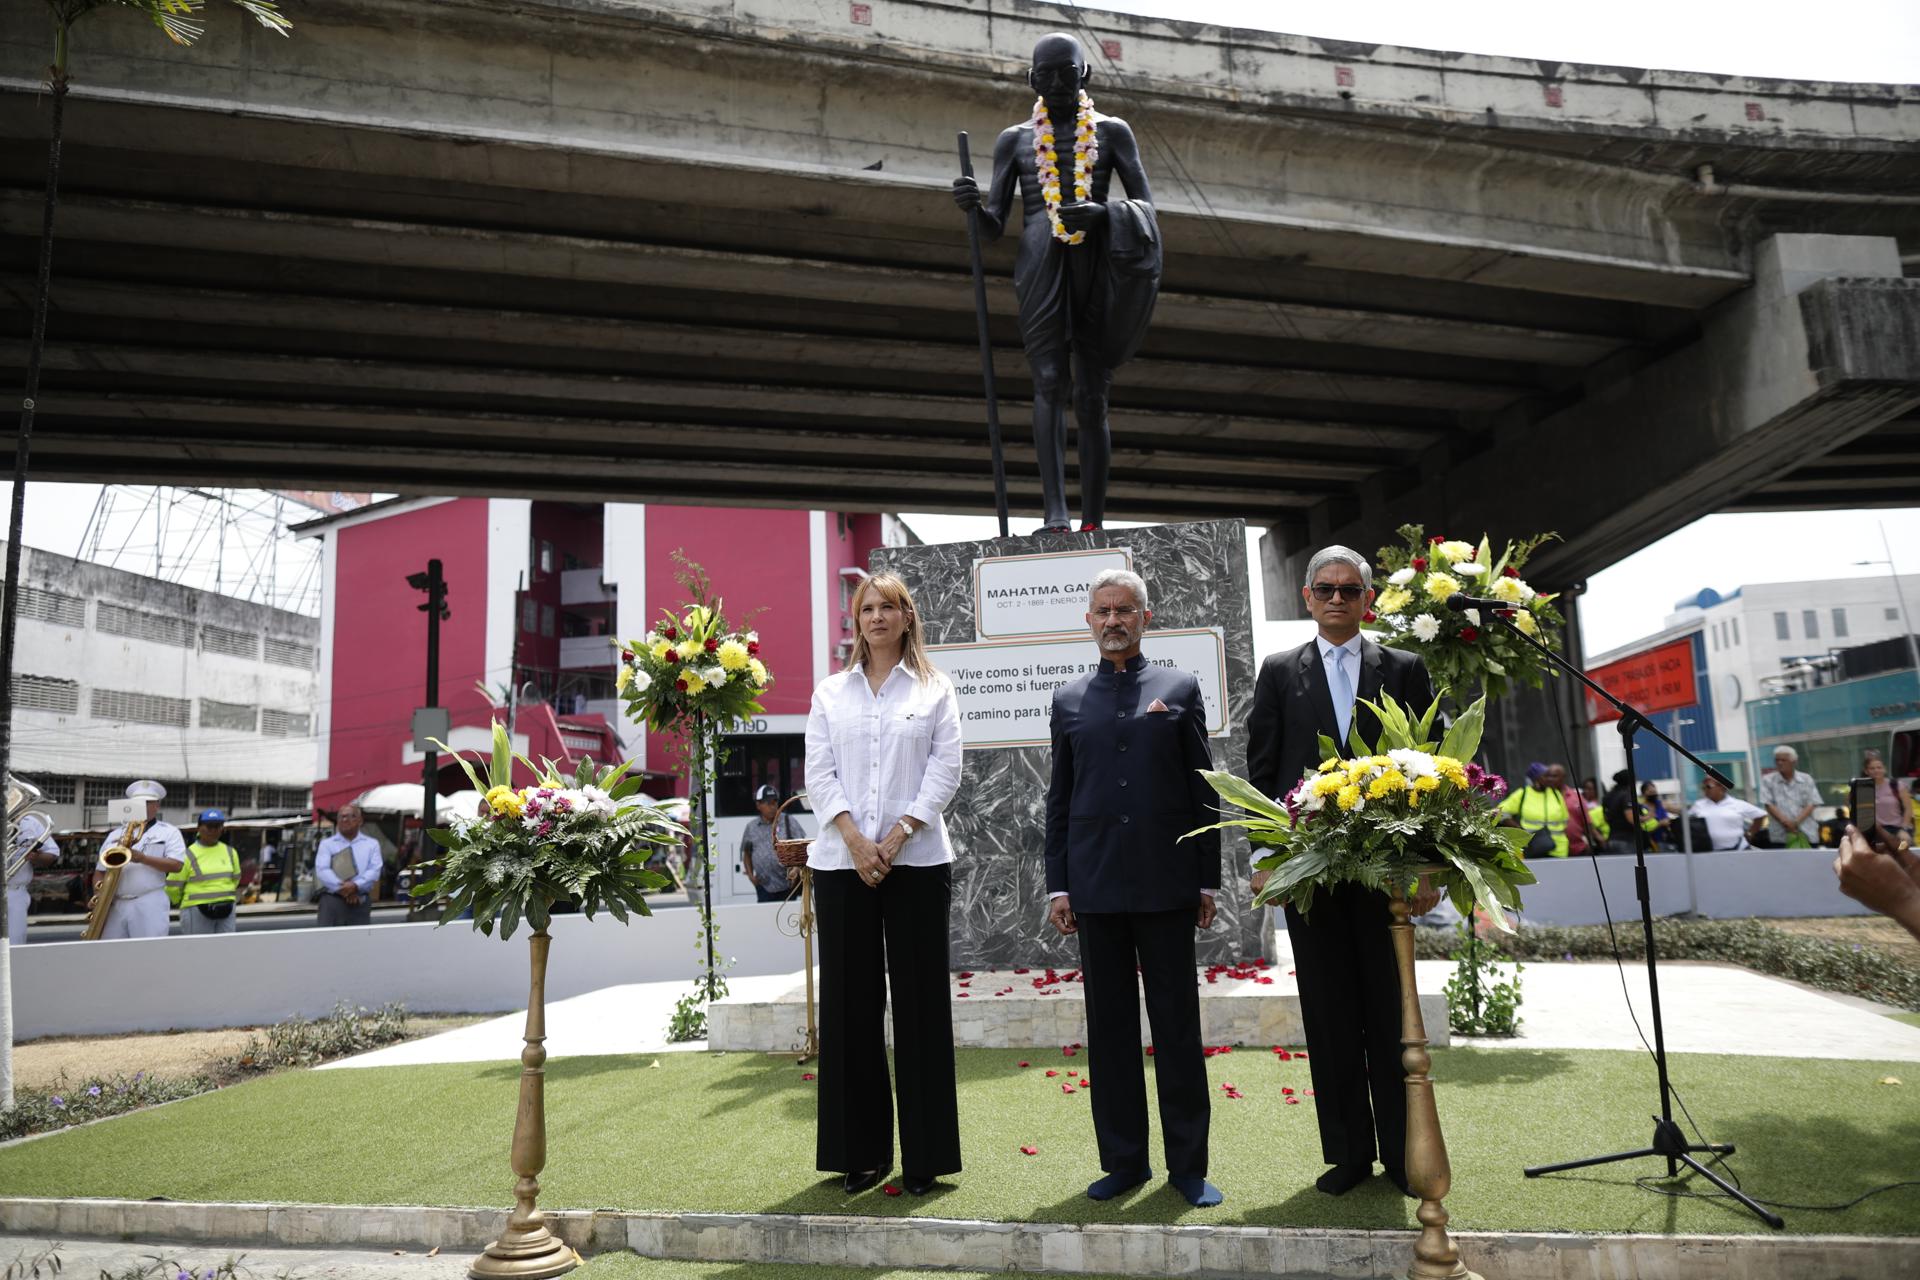 Indian Foreign Minister Subrahmanyam Jaishankar (c), Panamanian Multilateral Affairs and Cooperation Minister Yill Otero (l) and India's ambassador to Panama, Upender Singh Rawat (r) pose for photos on April 24, 2023, during a visit to the 1,000 Days Park in Panama City. EFE/ Bienvenido Velasco
